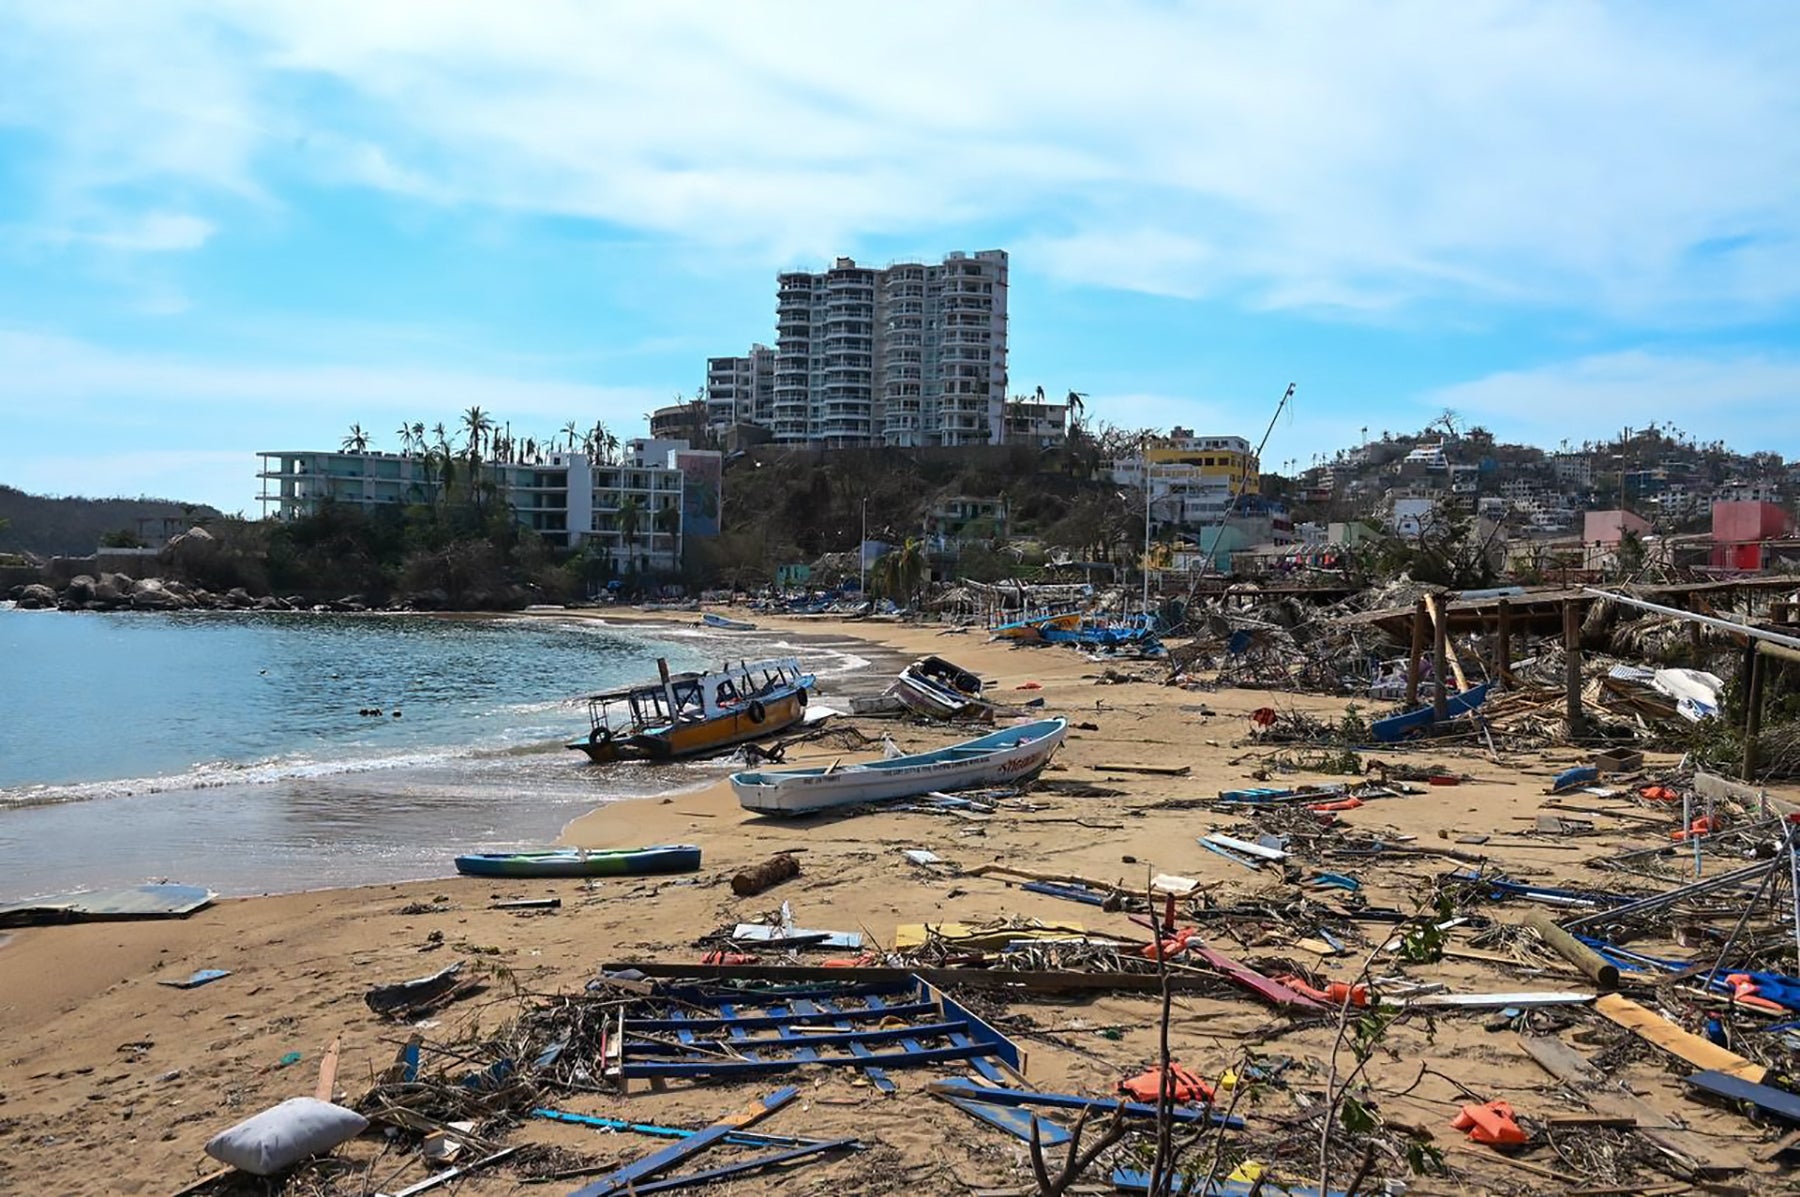 View of damage in the beach area of Acapulco on Thursday after Hurricane Otis